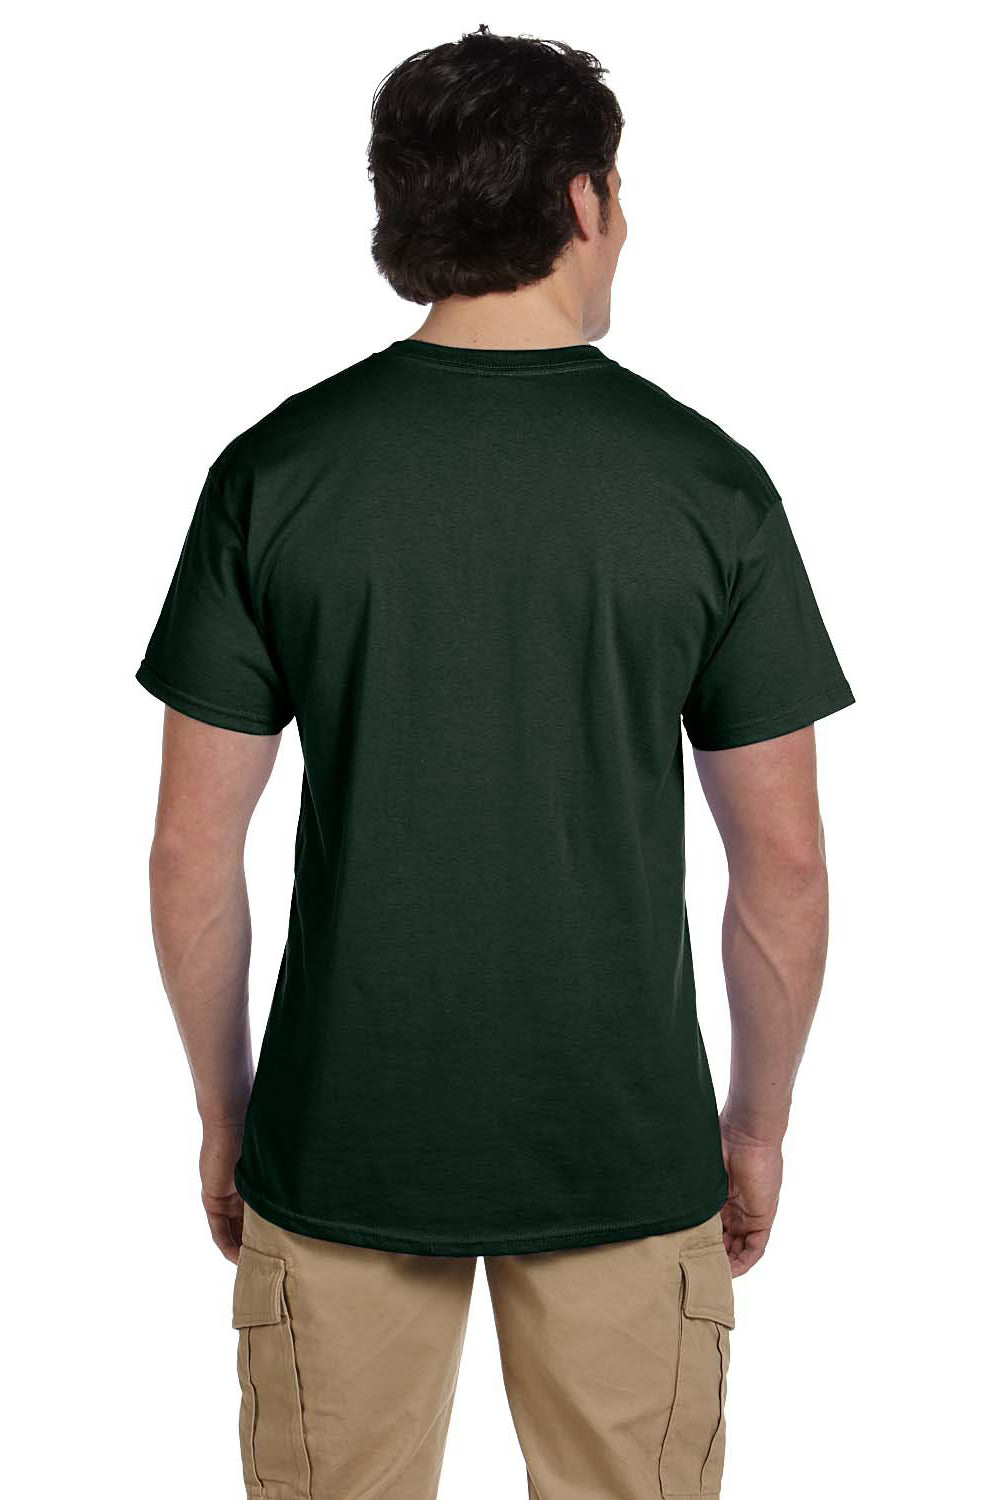 Fruit Of The Loom 3931 Mens HD Jersey Short Sleeve Crewneck T-Shirt Forest Green Back